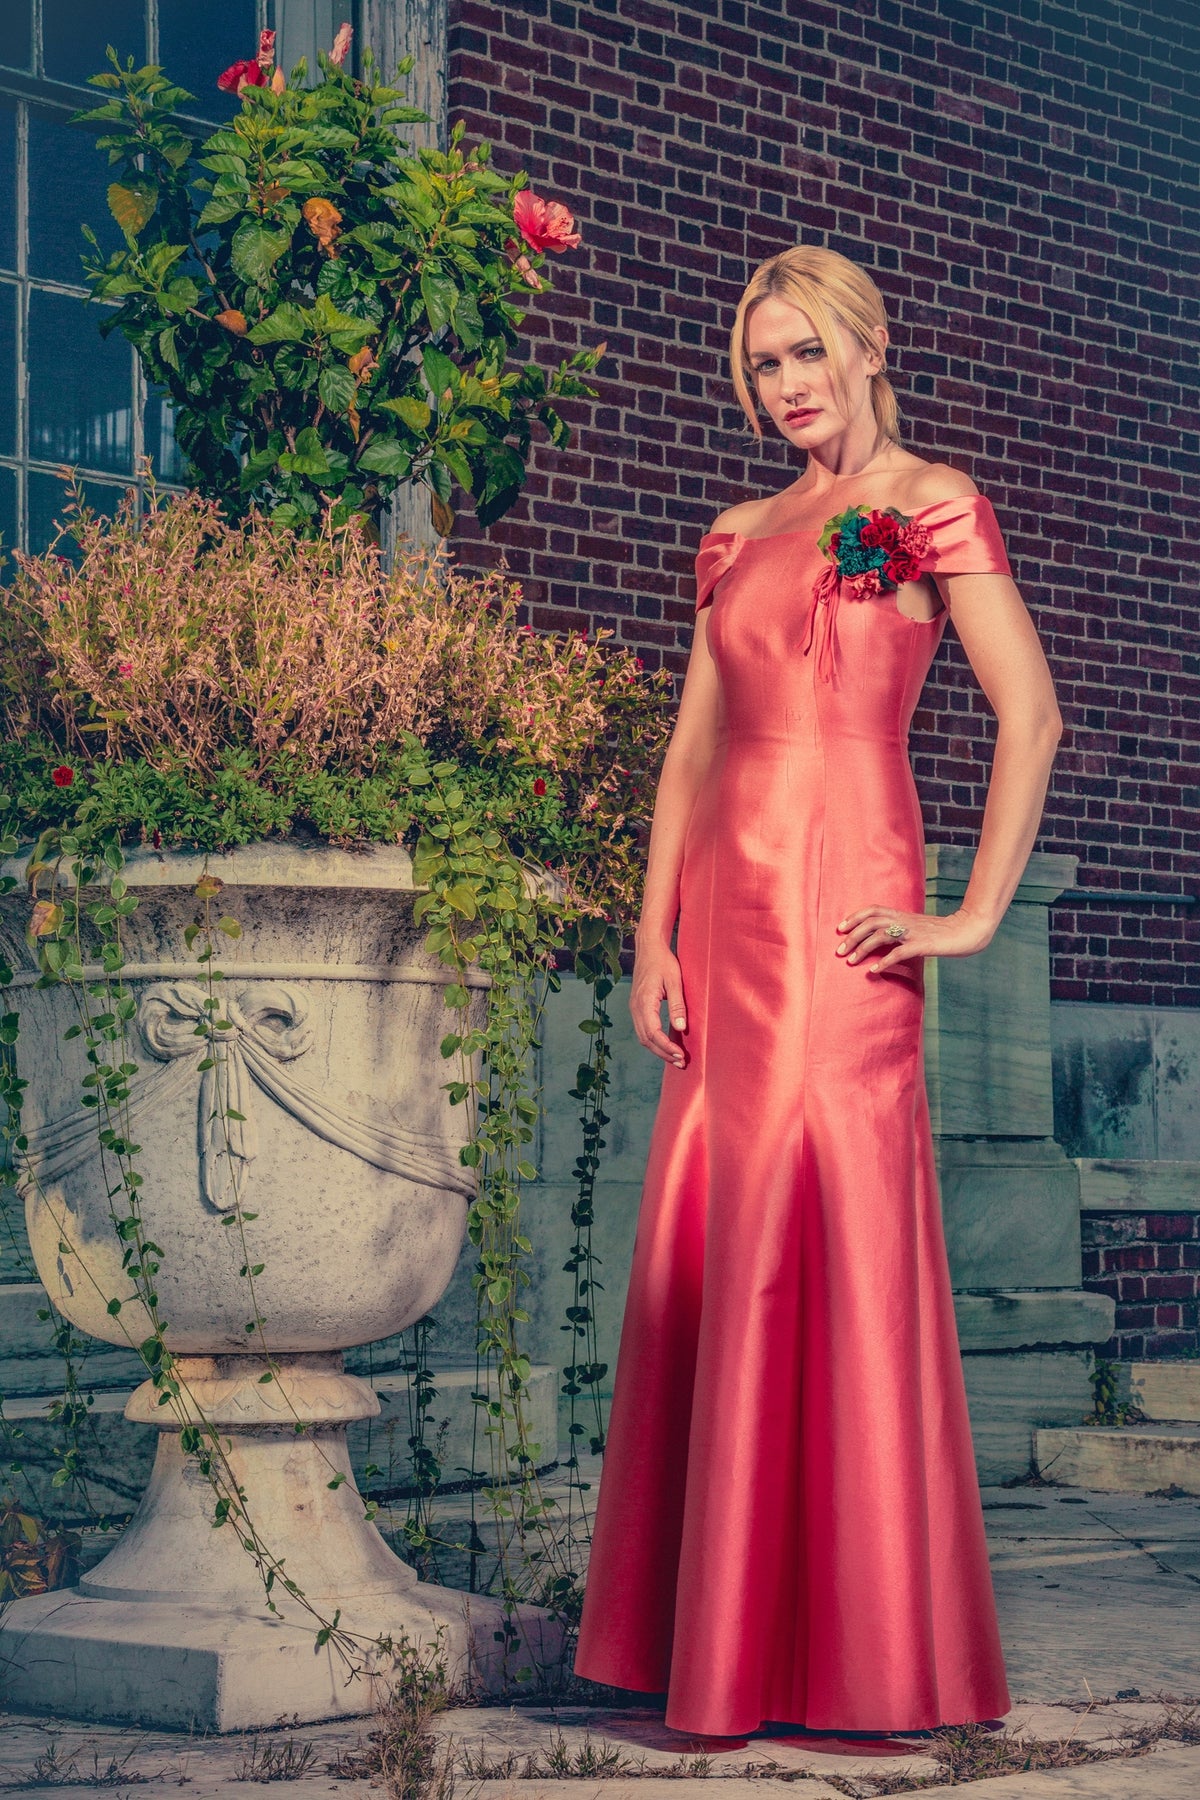 anna nieman designer dress Boston. A dress for your special gala, the vibrant coral color and elegant shape make you stand out beautifully in the crowd. Be ready to handle a lot of compliments!